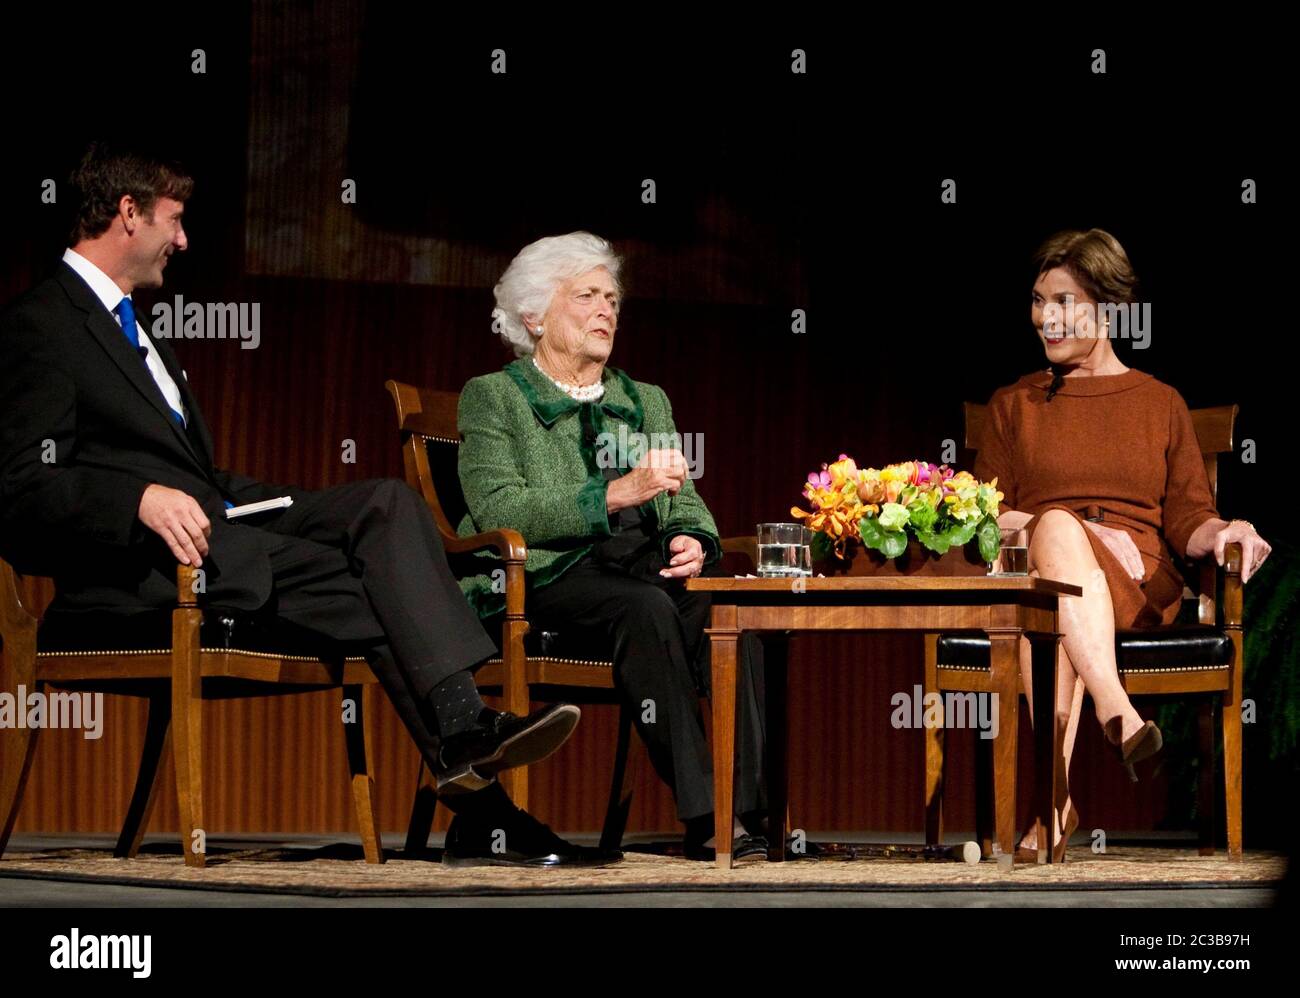 Austin, Texas USA, November 16, 2012: Former First Lady Barbara Bush (center) speaks to her daughter-in-law, former First Lady Laura Bush, and moderator Mark Updegrove during 'The Enduring Legacies of America's First Ladies' conference at the LBJ Presidential Library. ©MKC / Daemmrich Photos Stock Photo